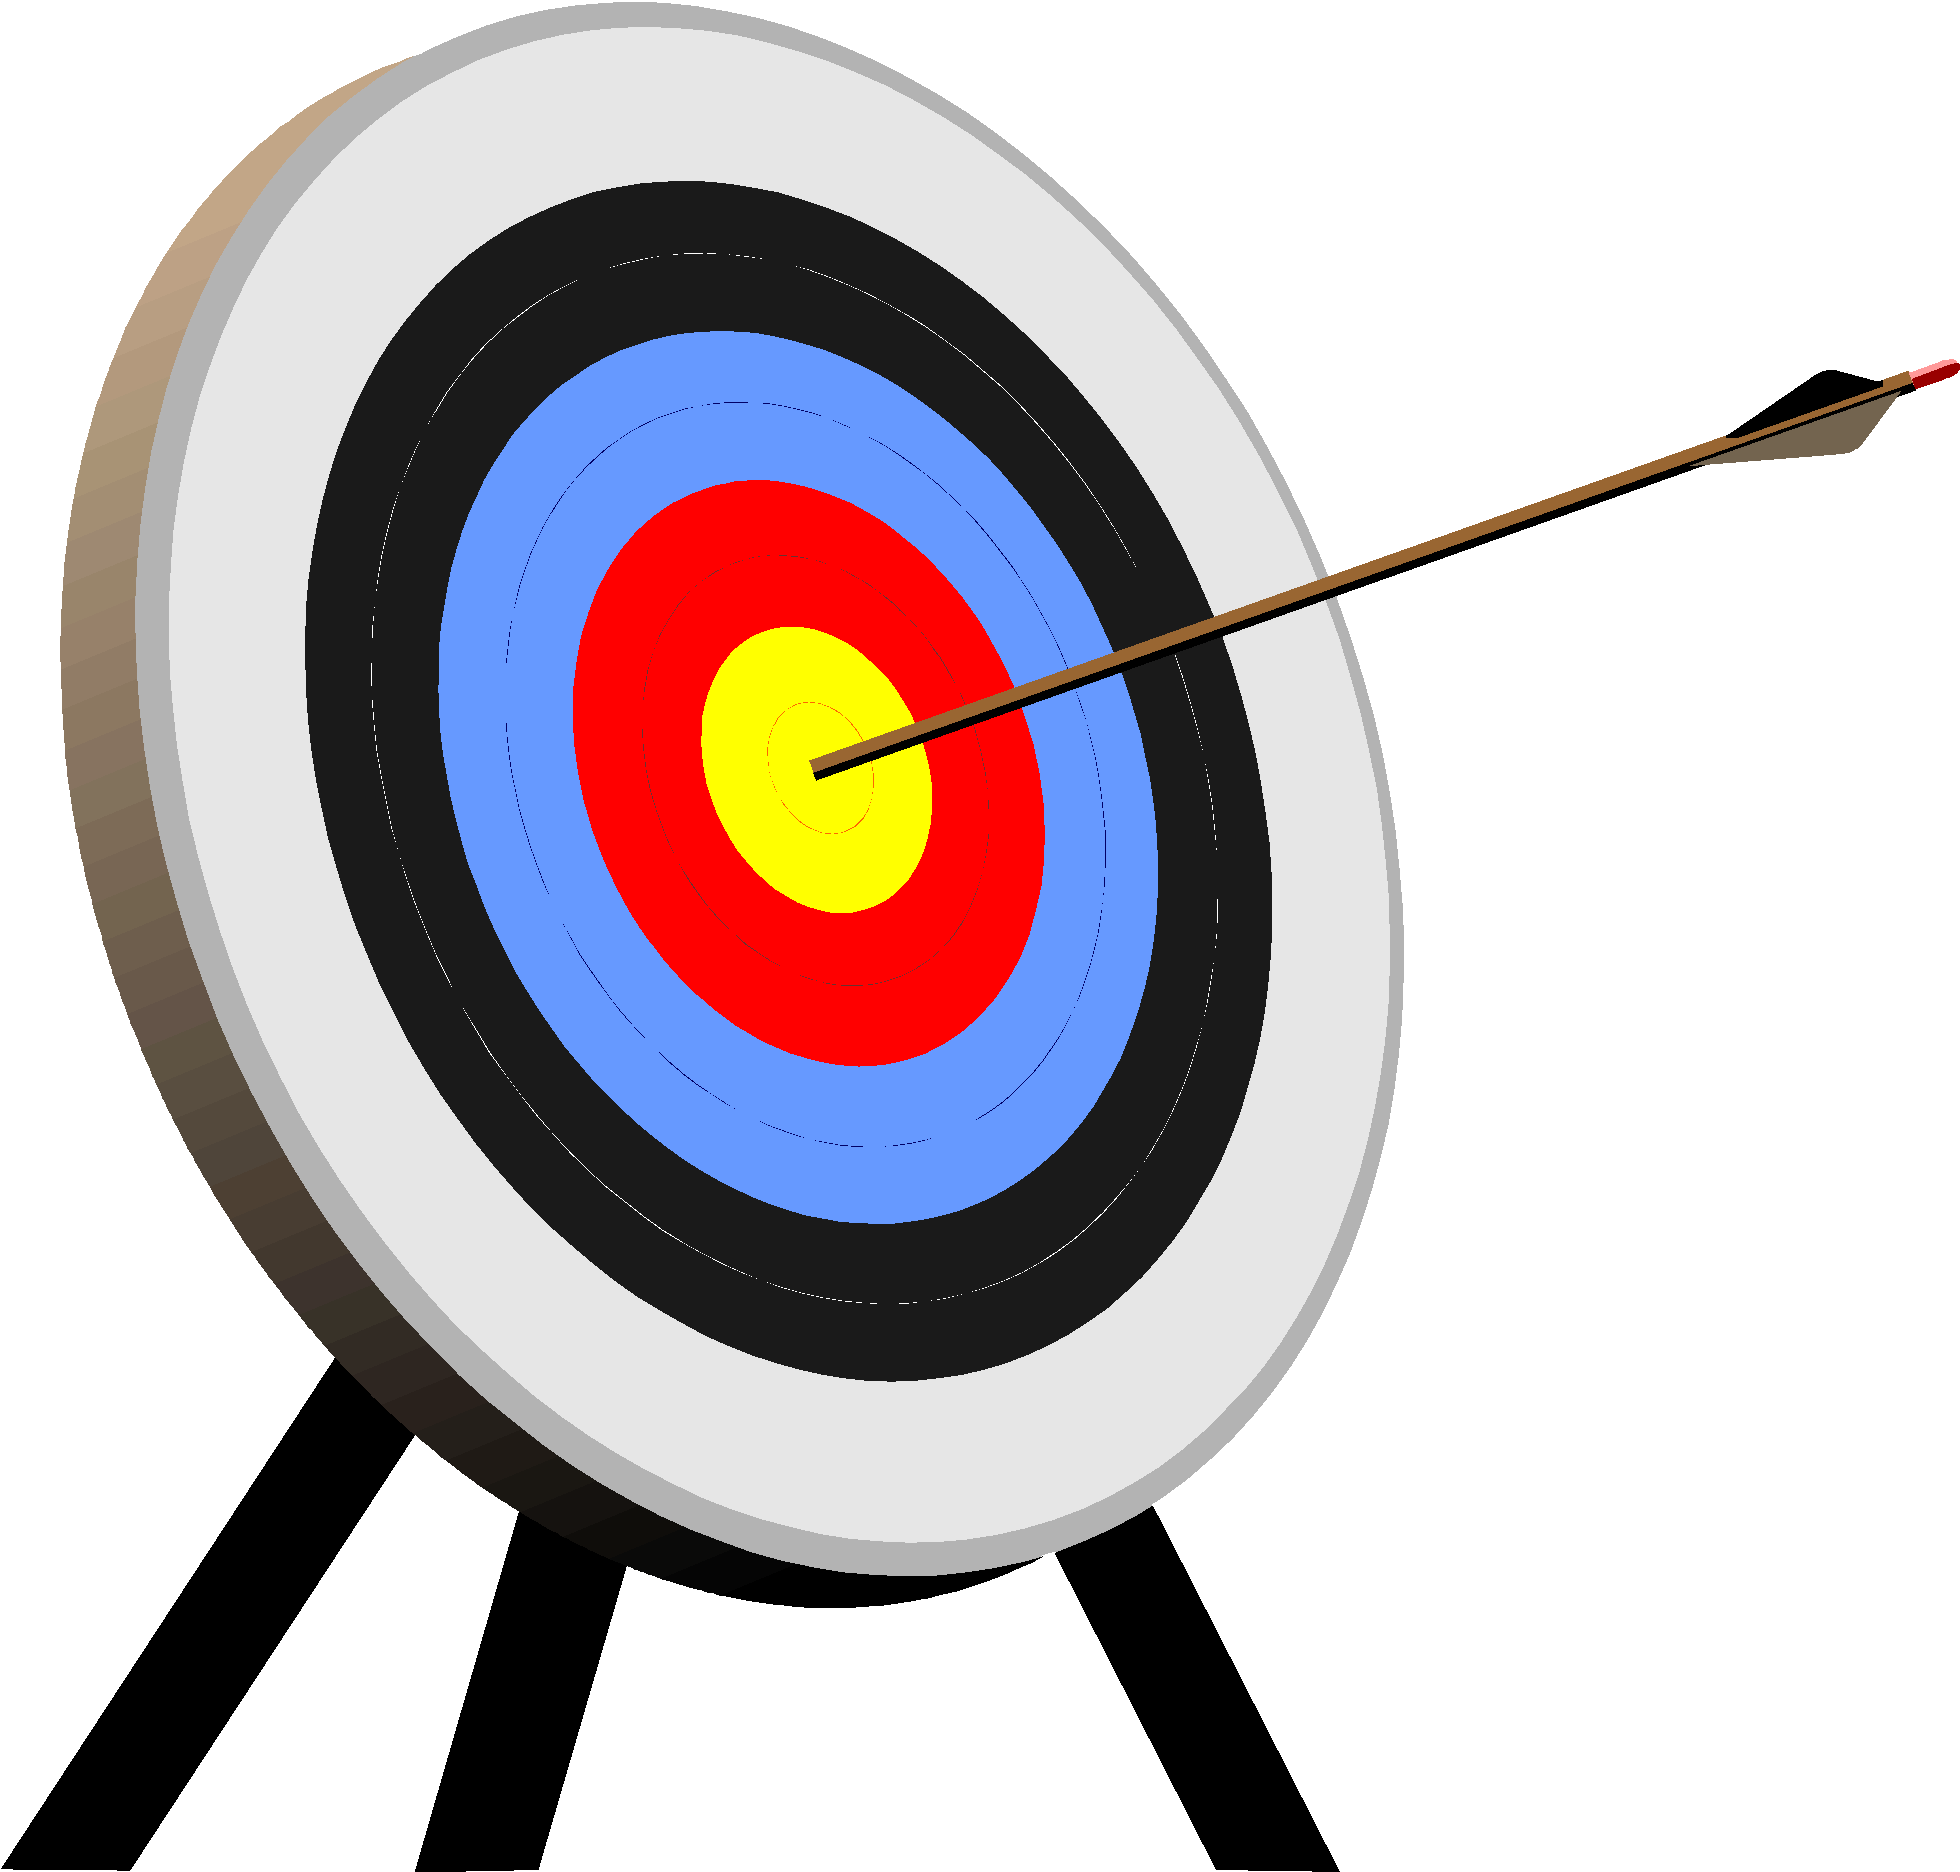 Free Pictures Of Archery, Download Free Clip Art, Free ...